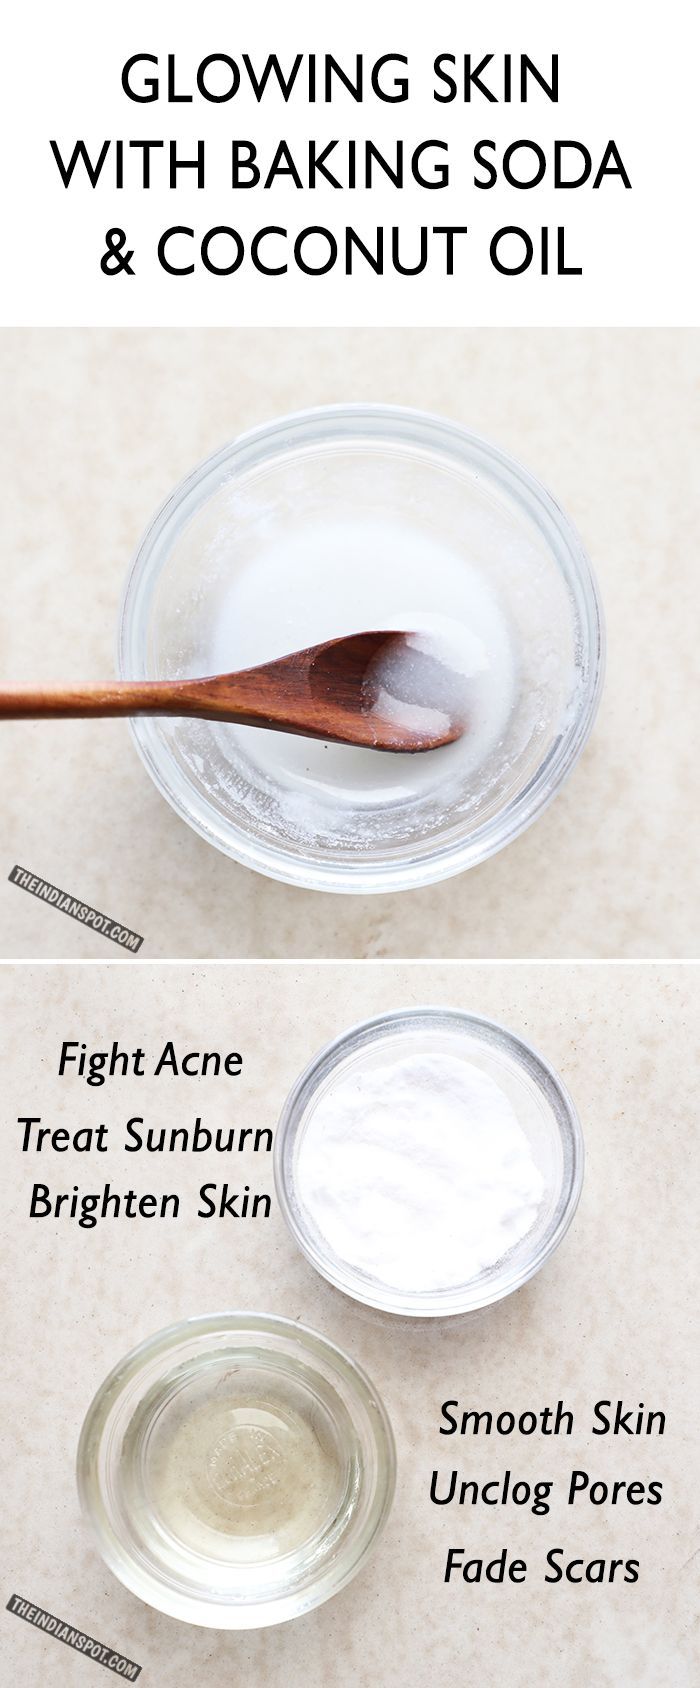 DIY face/body scrub along with its benefits: RECIPE: ½ cup coconut oil 2/3 cup ...